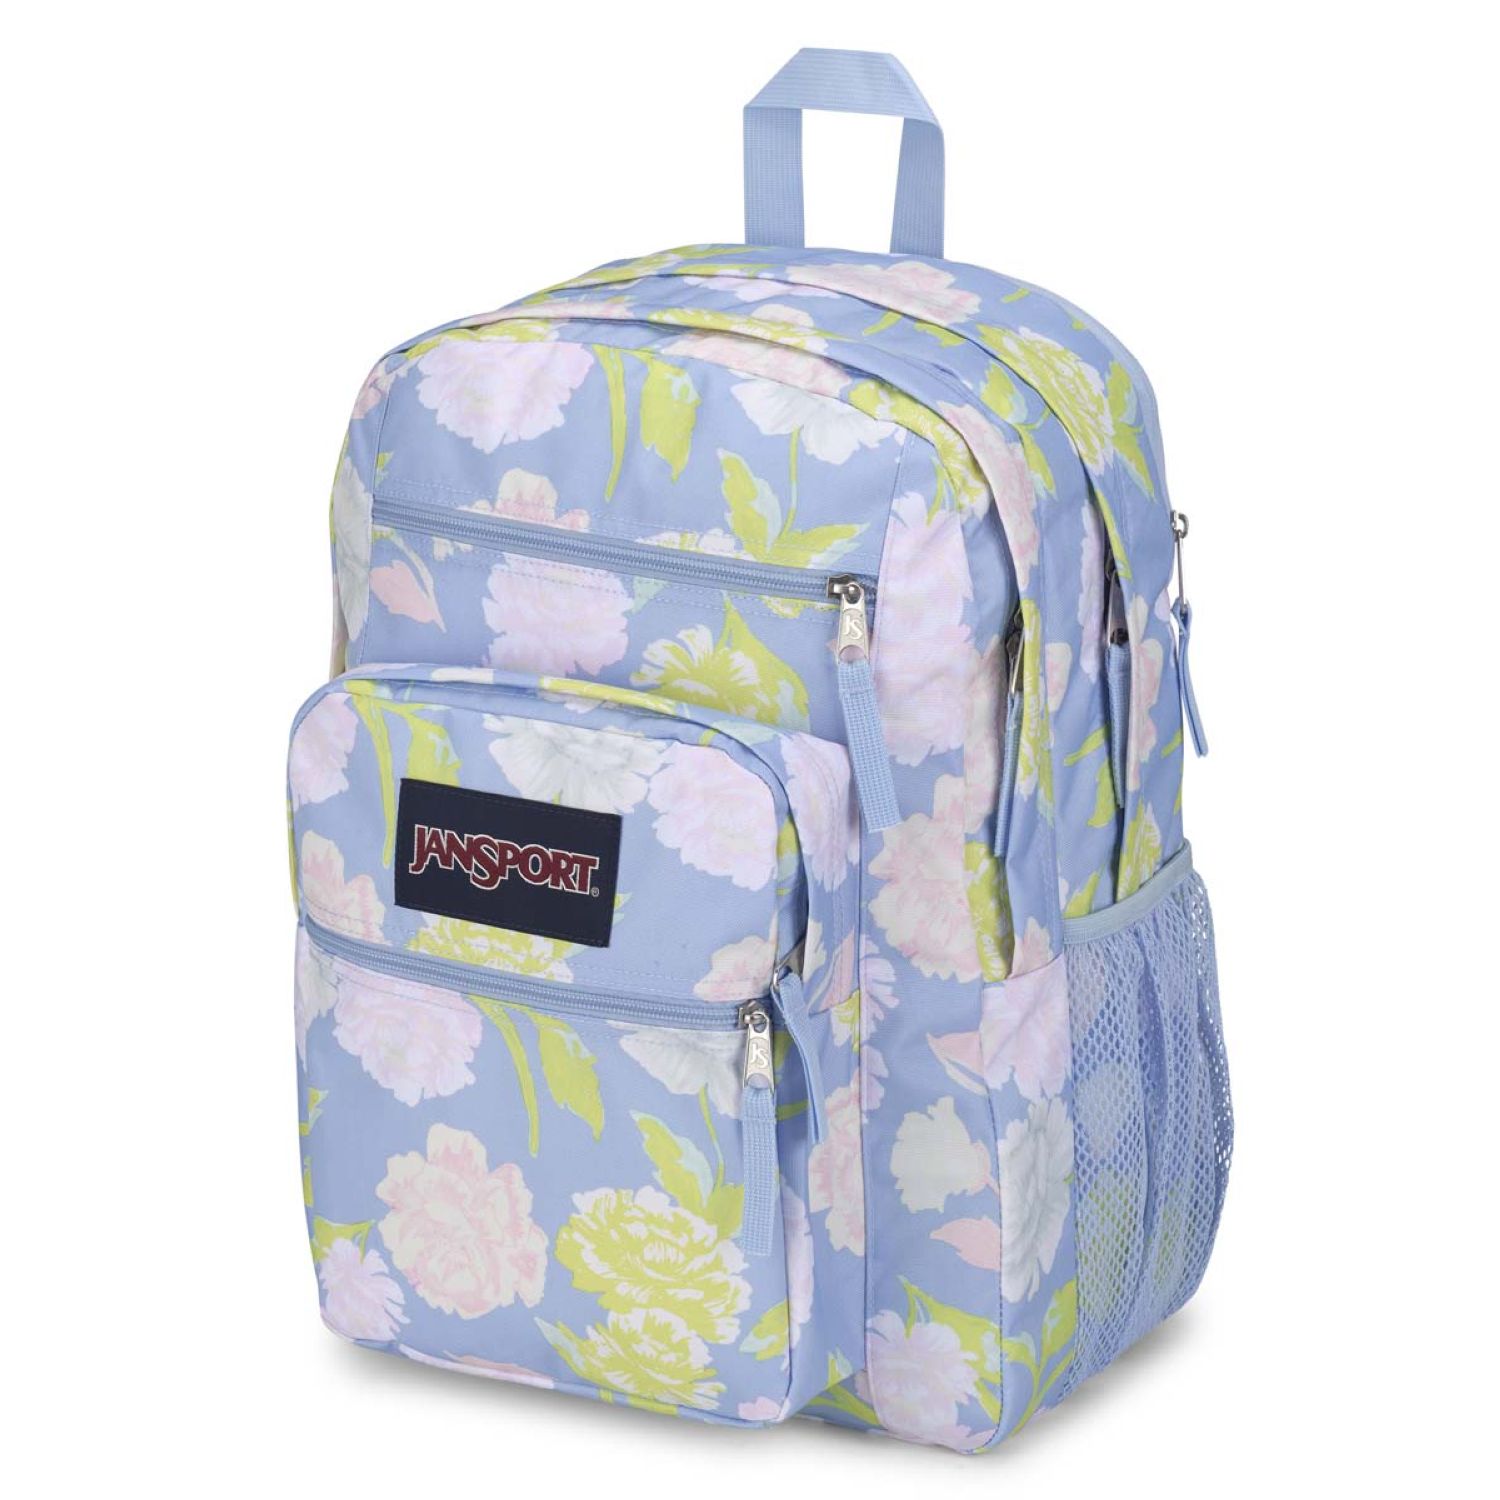 Buy Jansport Big Student Backpack - Autumn Tapestry Hydrangea in ...